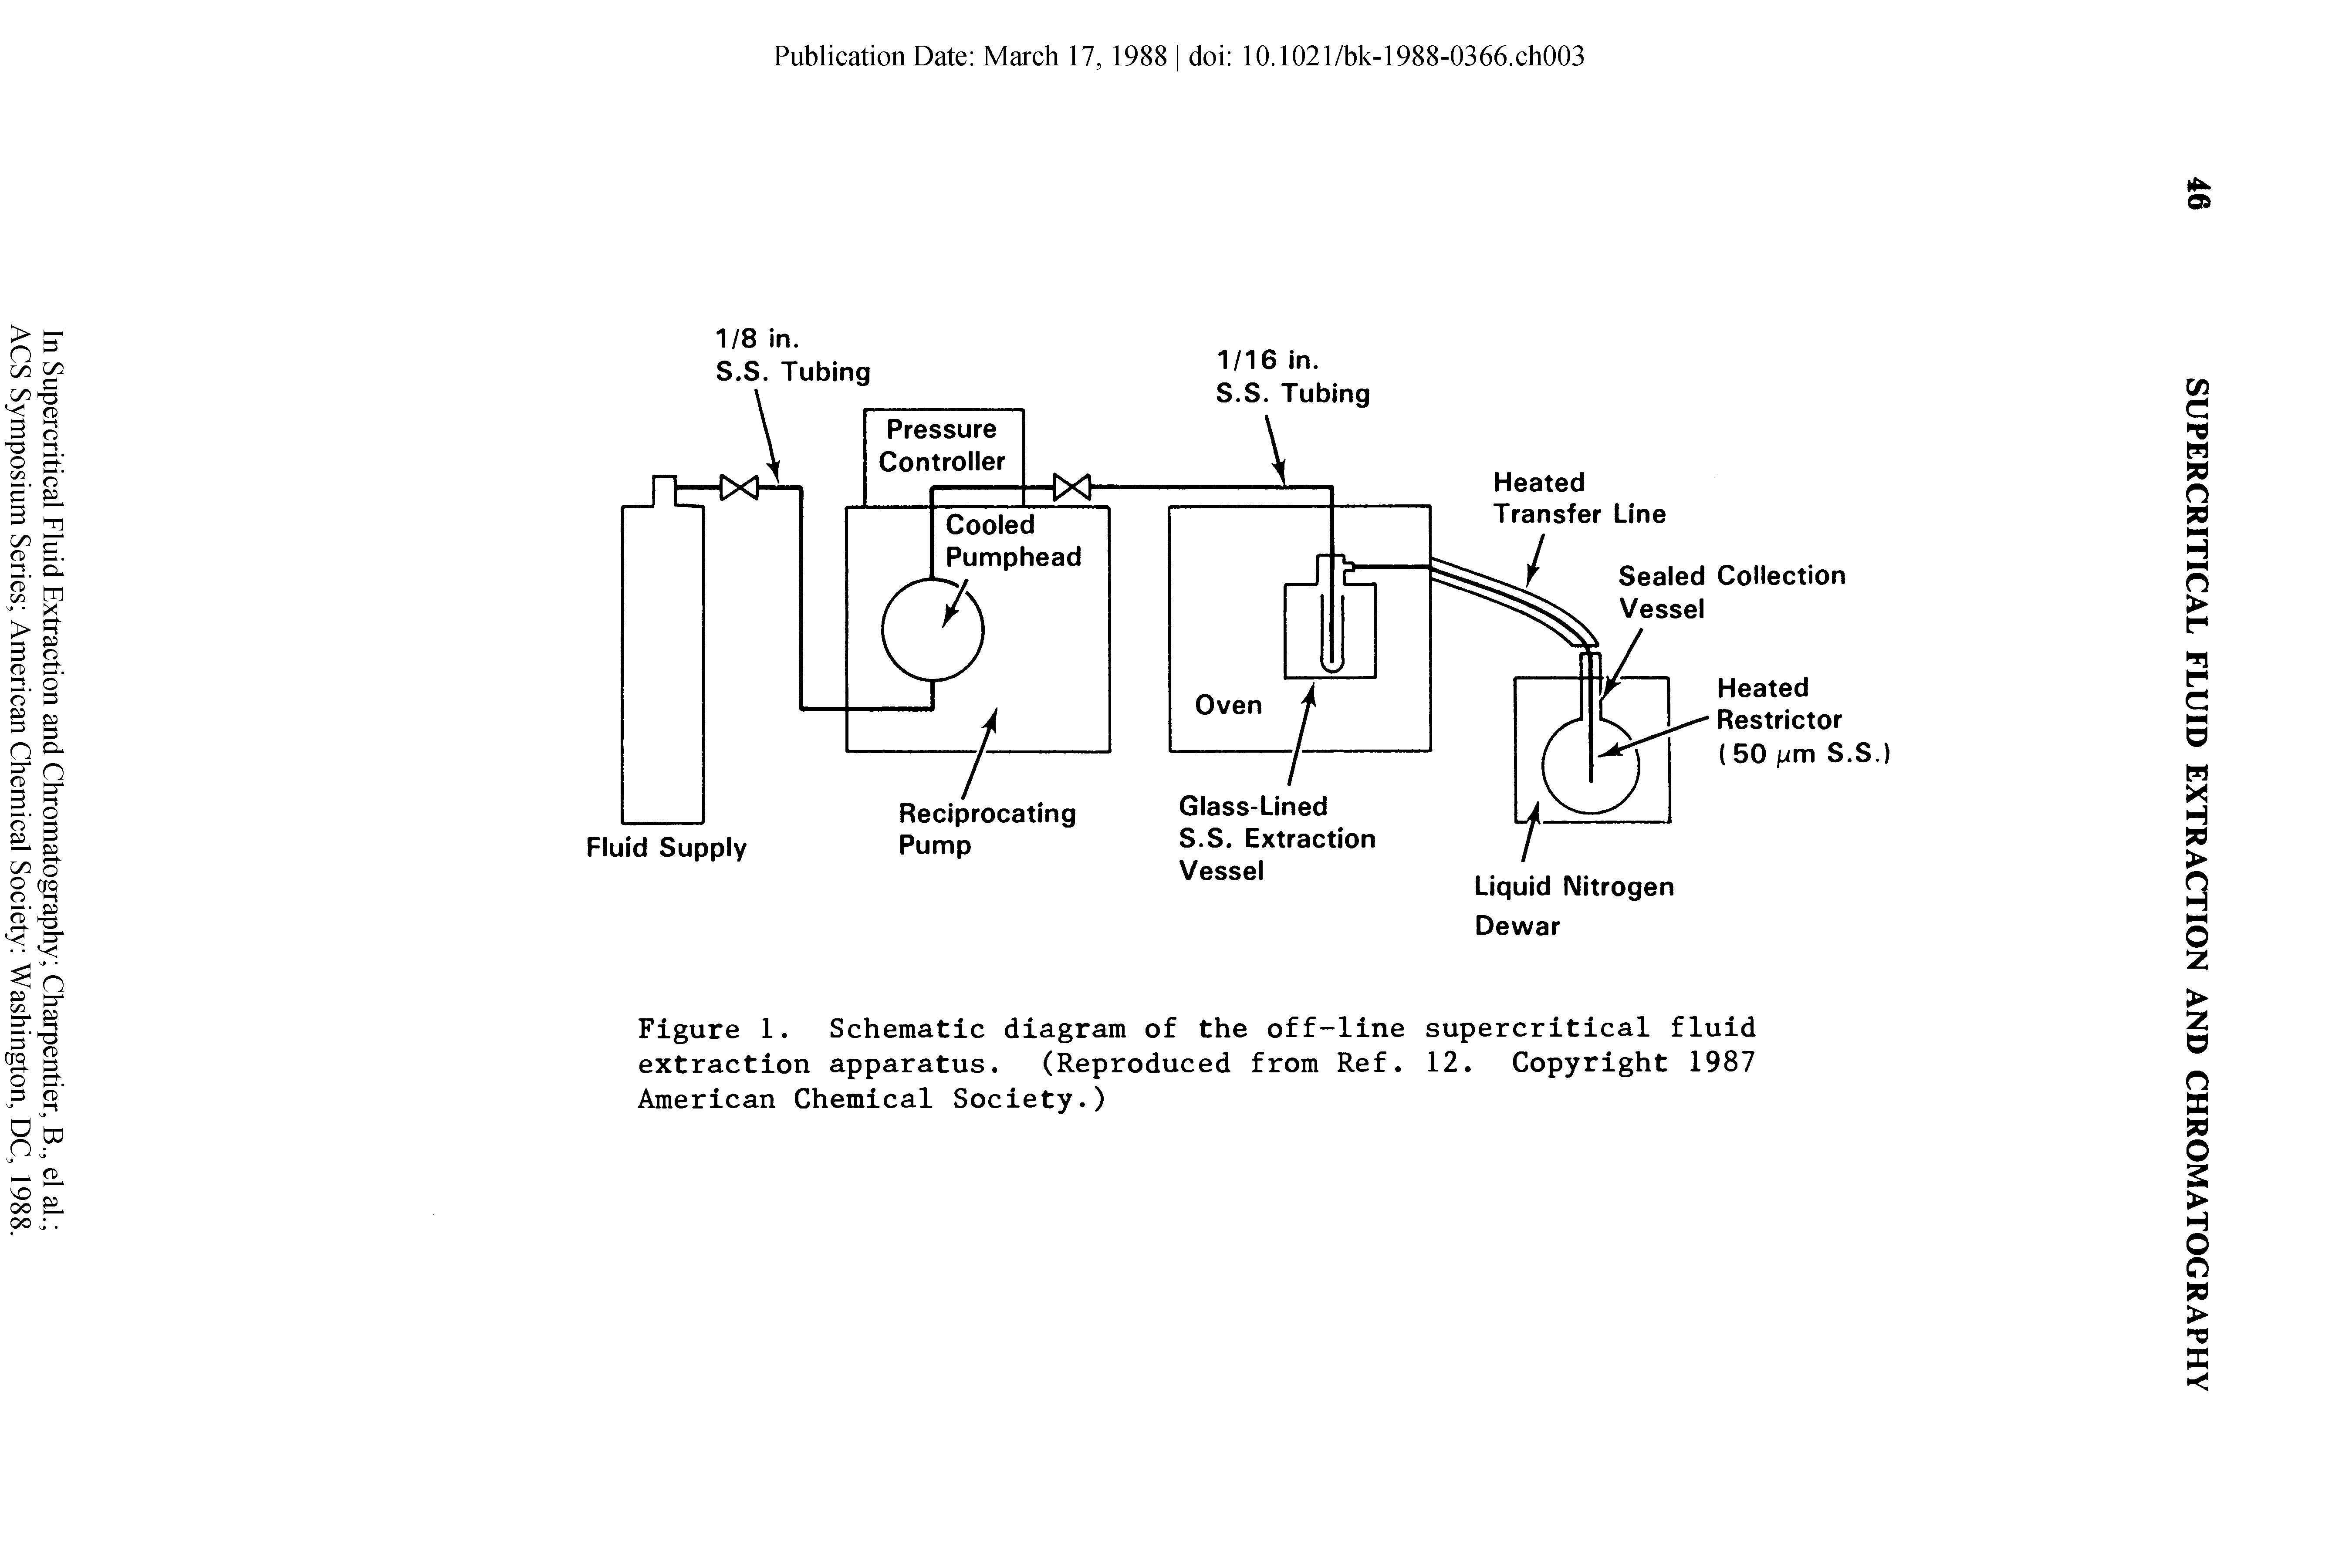 Figure 1. Schematic diagram of the off-line supercritical fluid extraction apparatus. (Reproduced from Ref. 12. Copyright 1987 American Chemical Society.)...